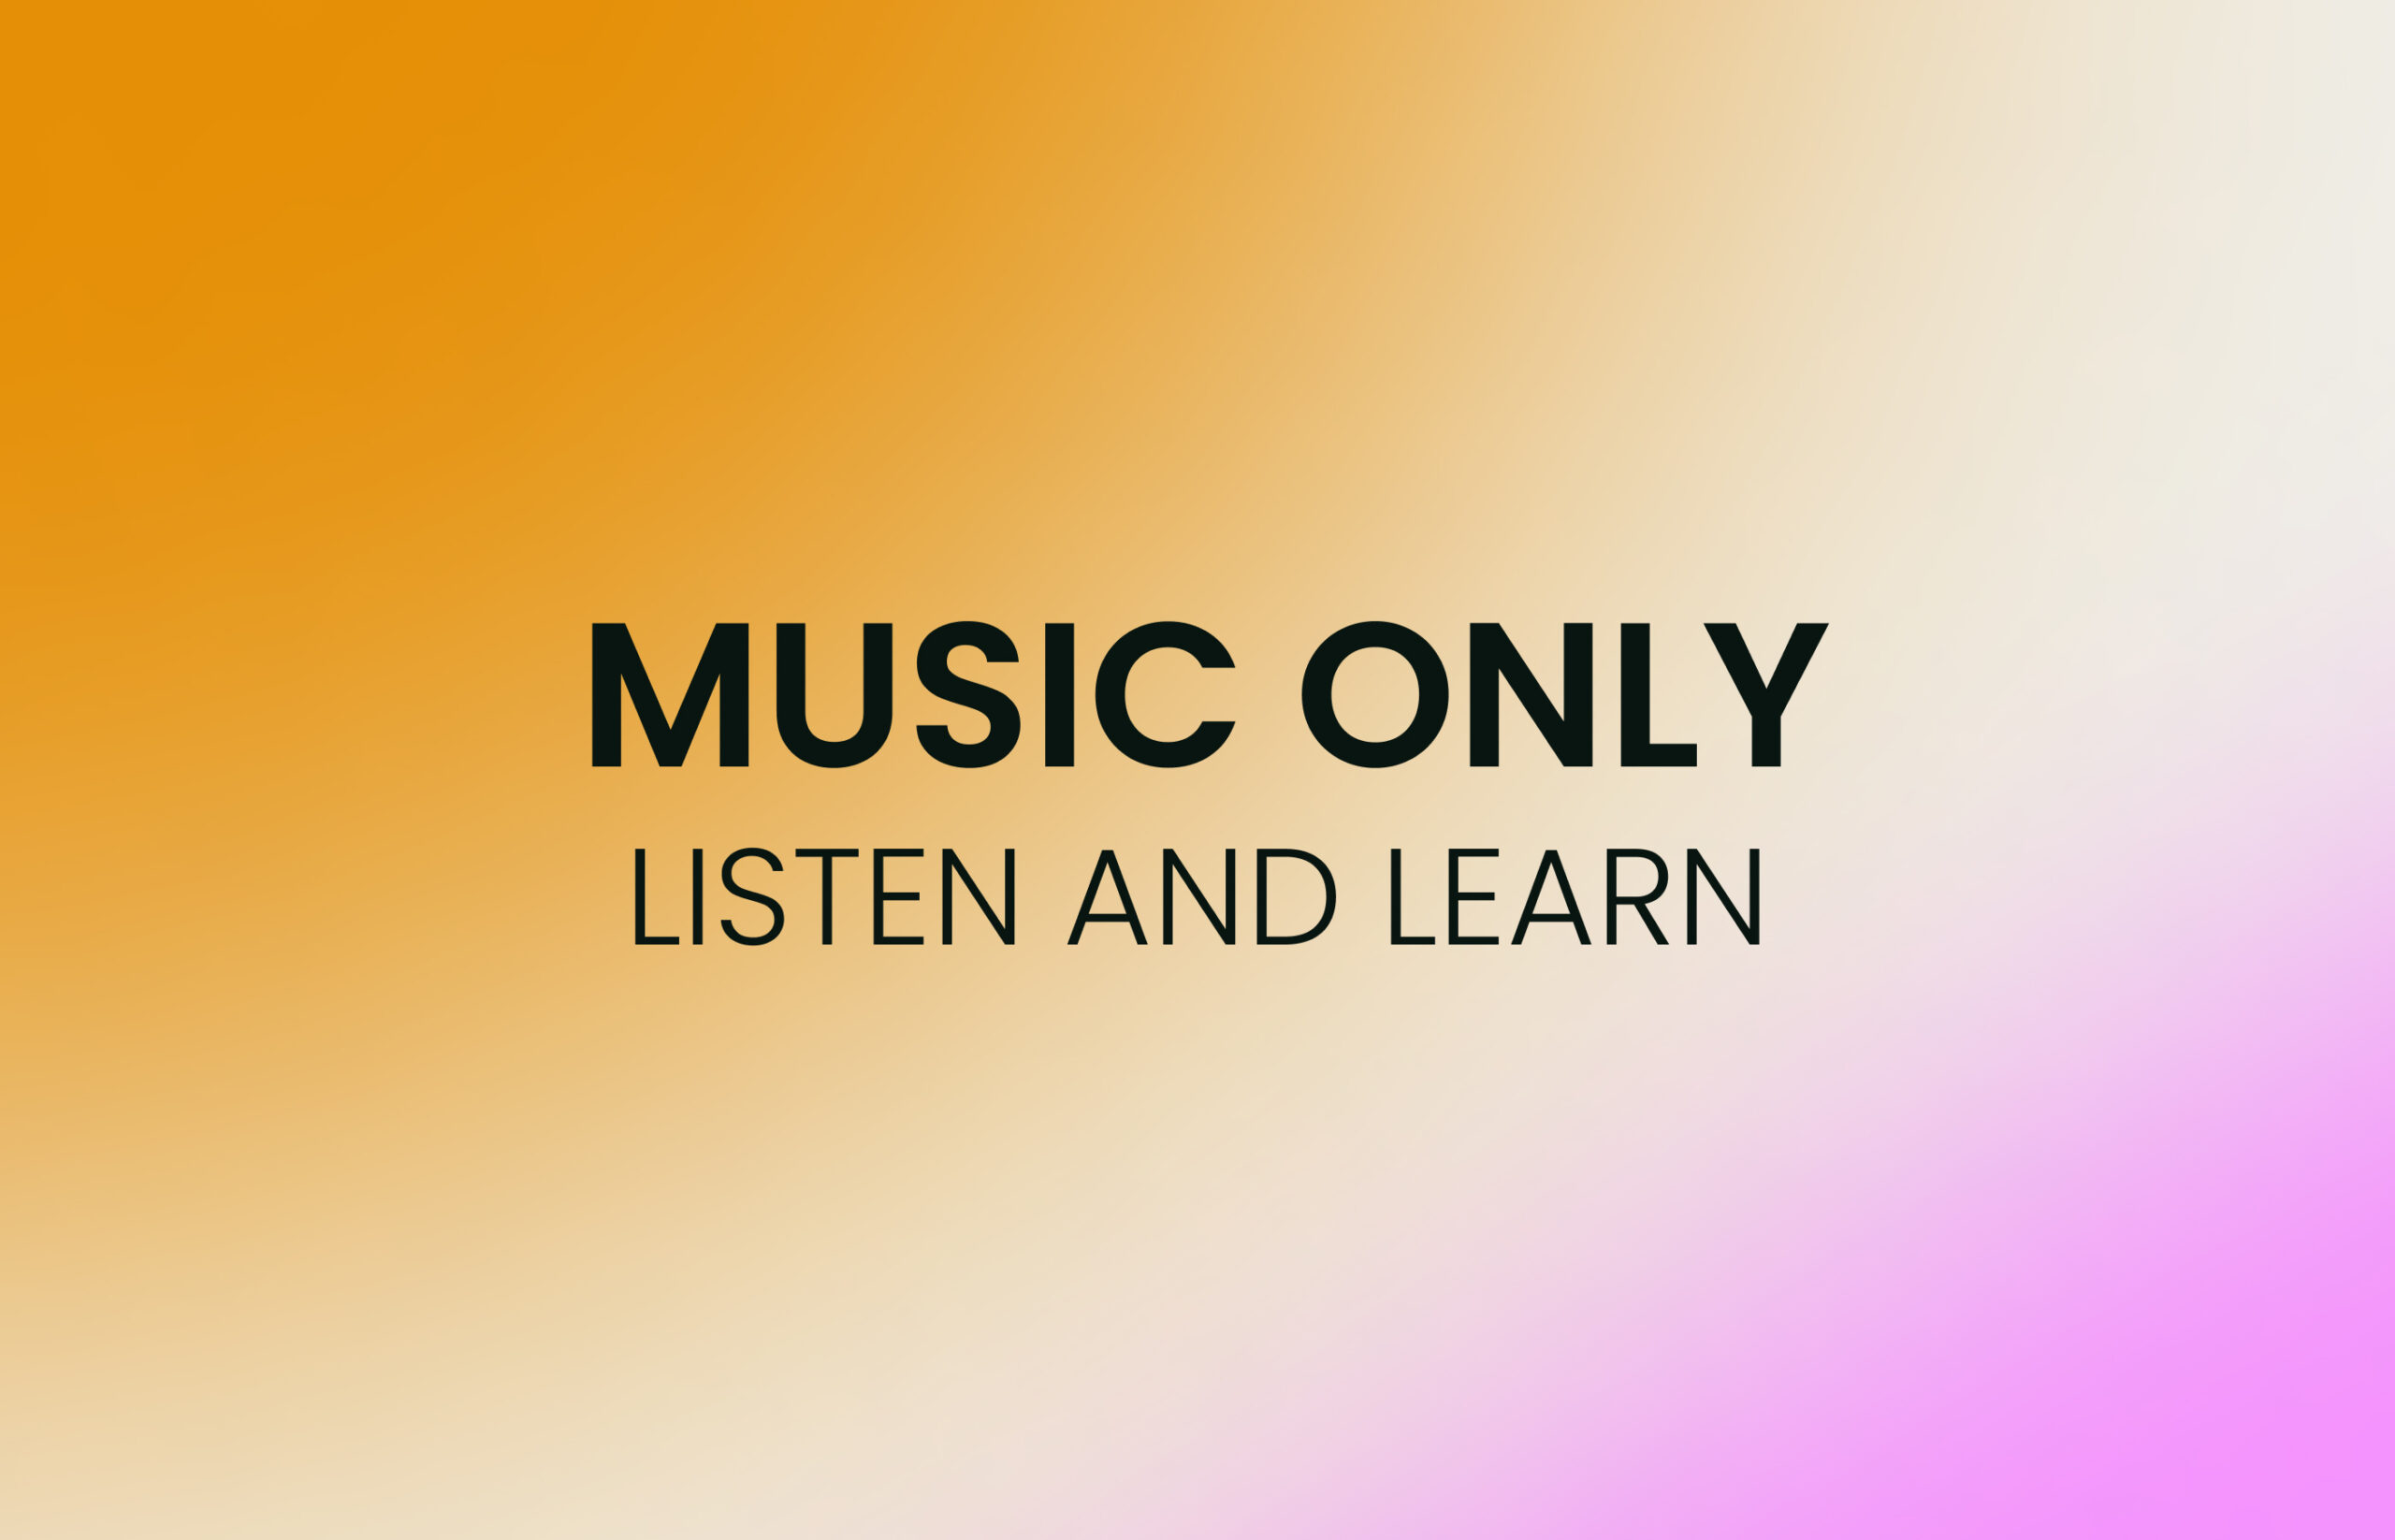 Music only: Listen and learn